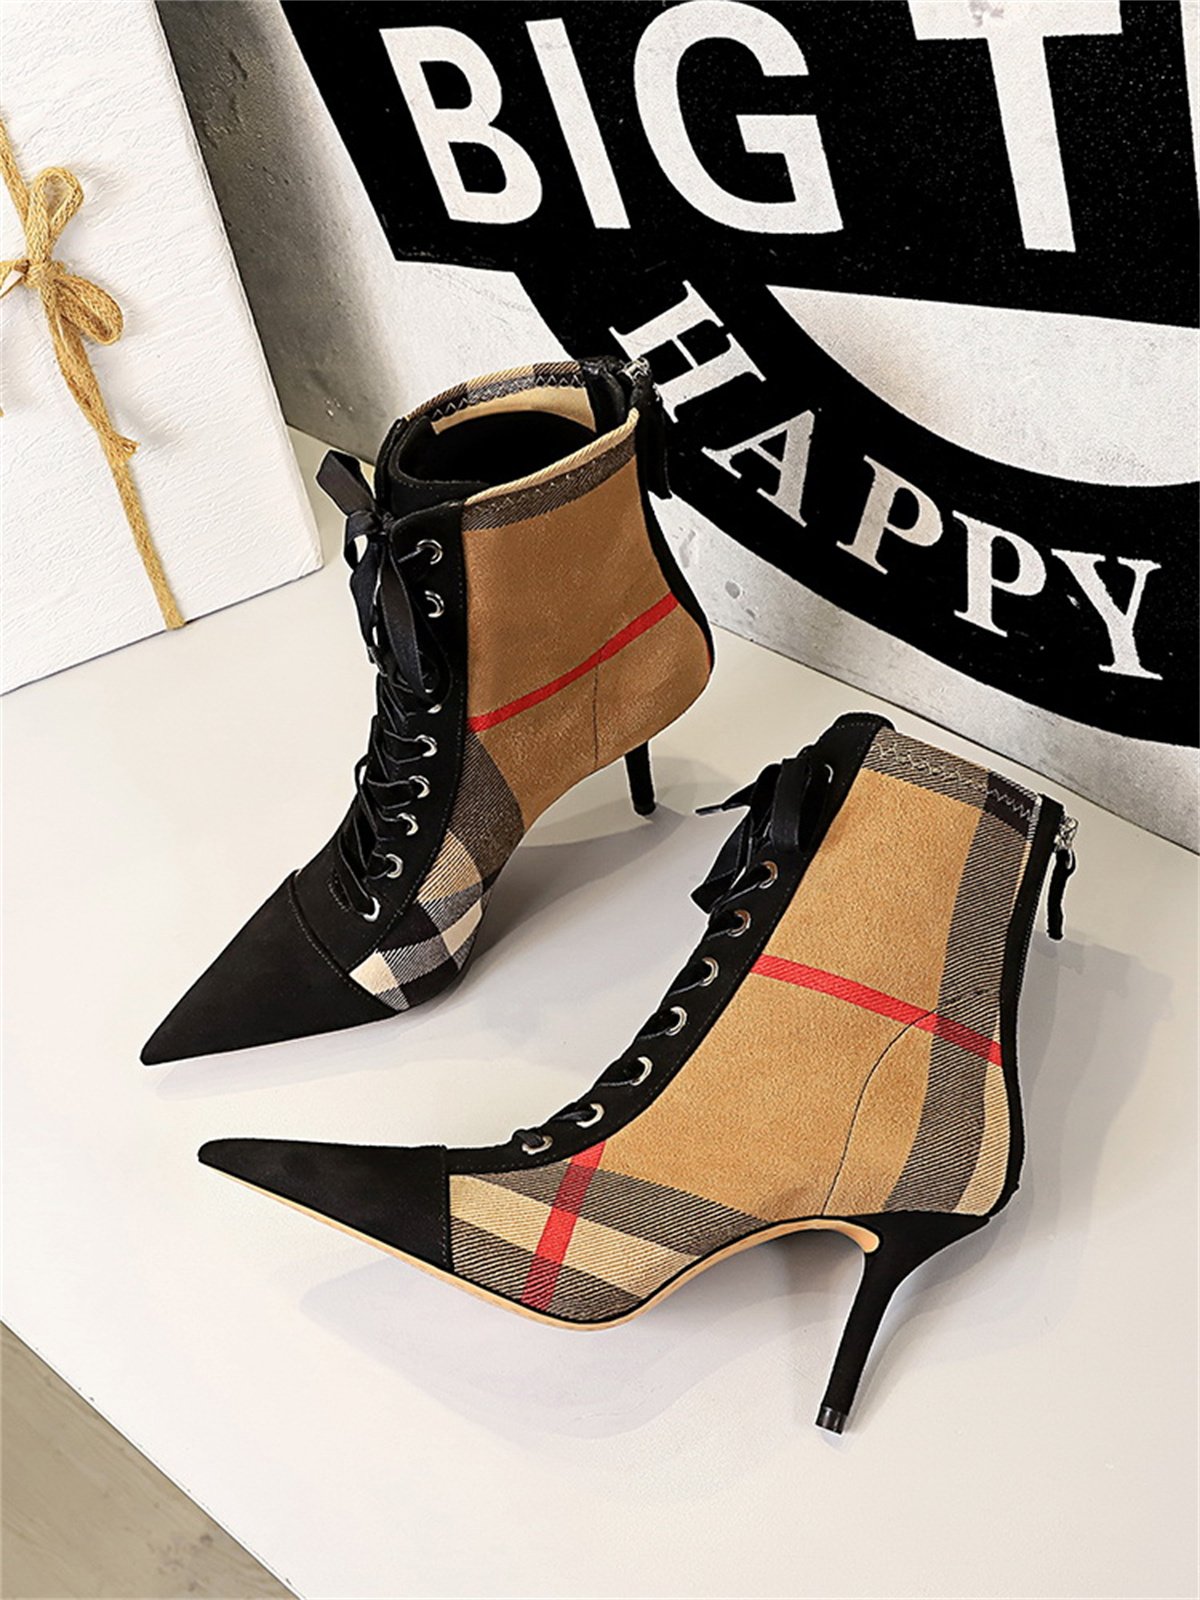 Color-block Fashion Lace-Up Stiletto Heel Boots with Back Zip